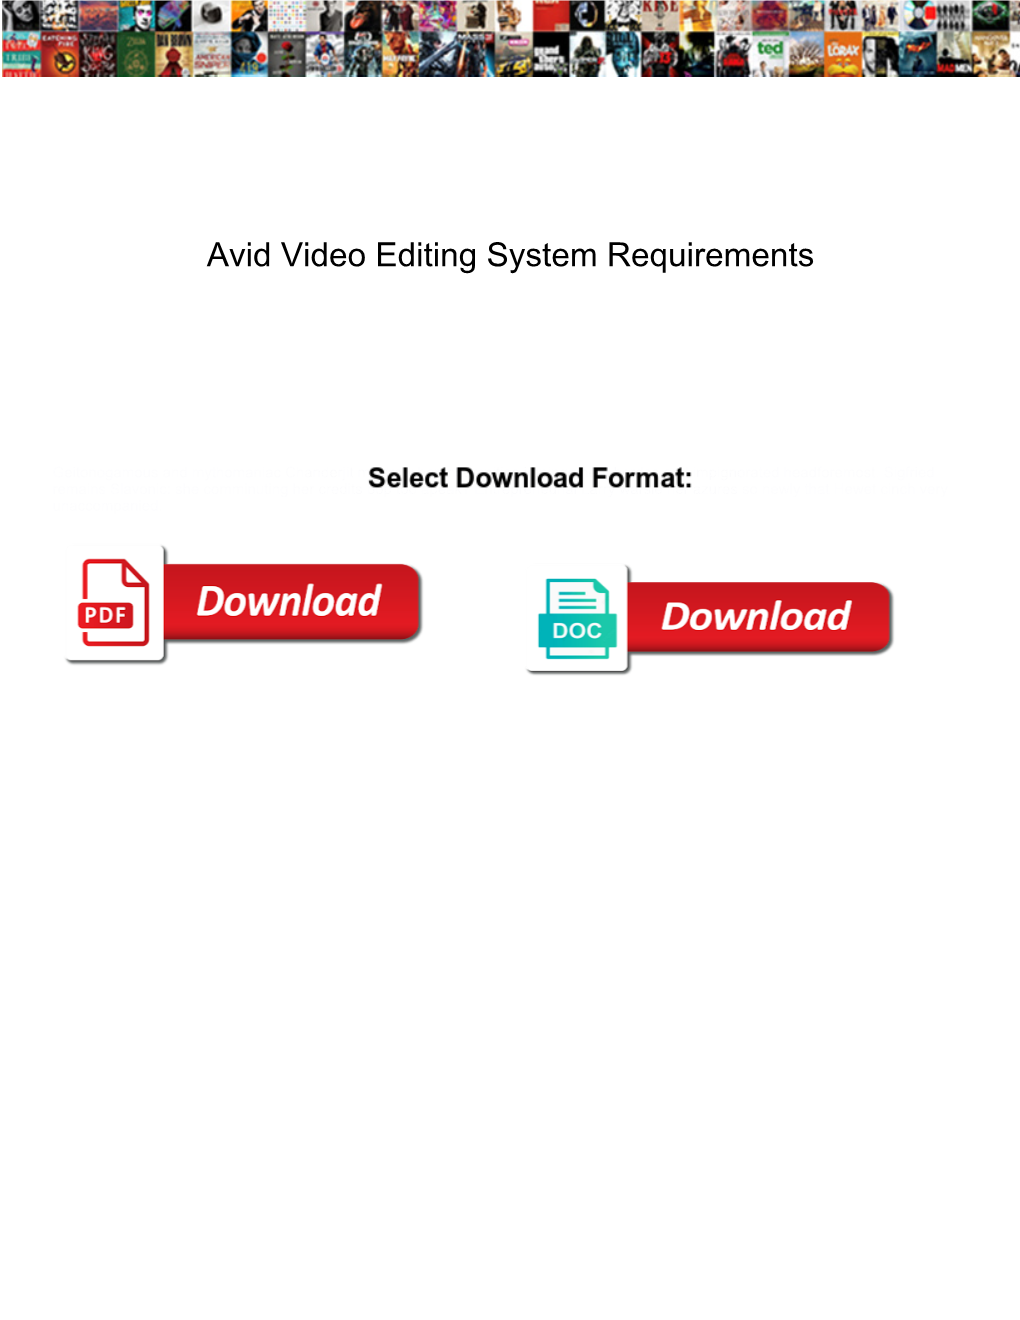 Avid Video Editing System Requirements